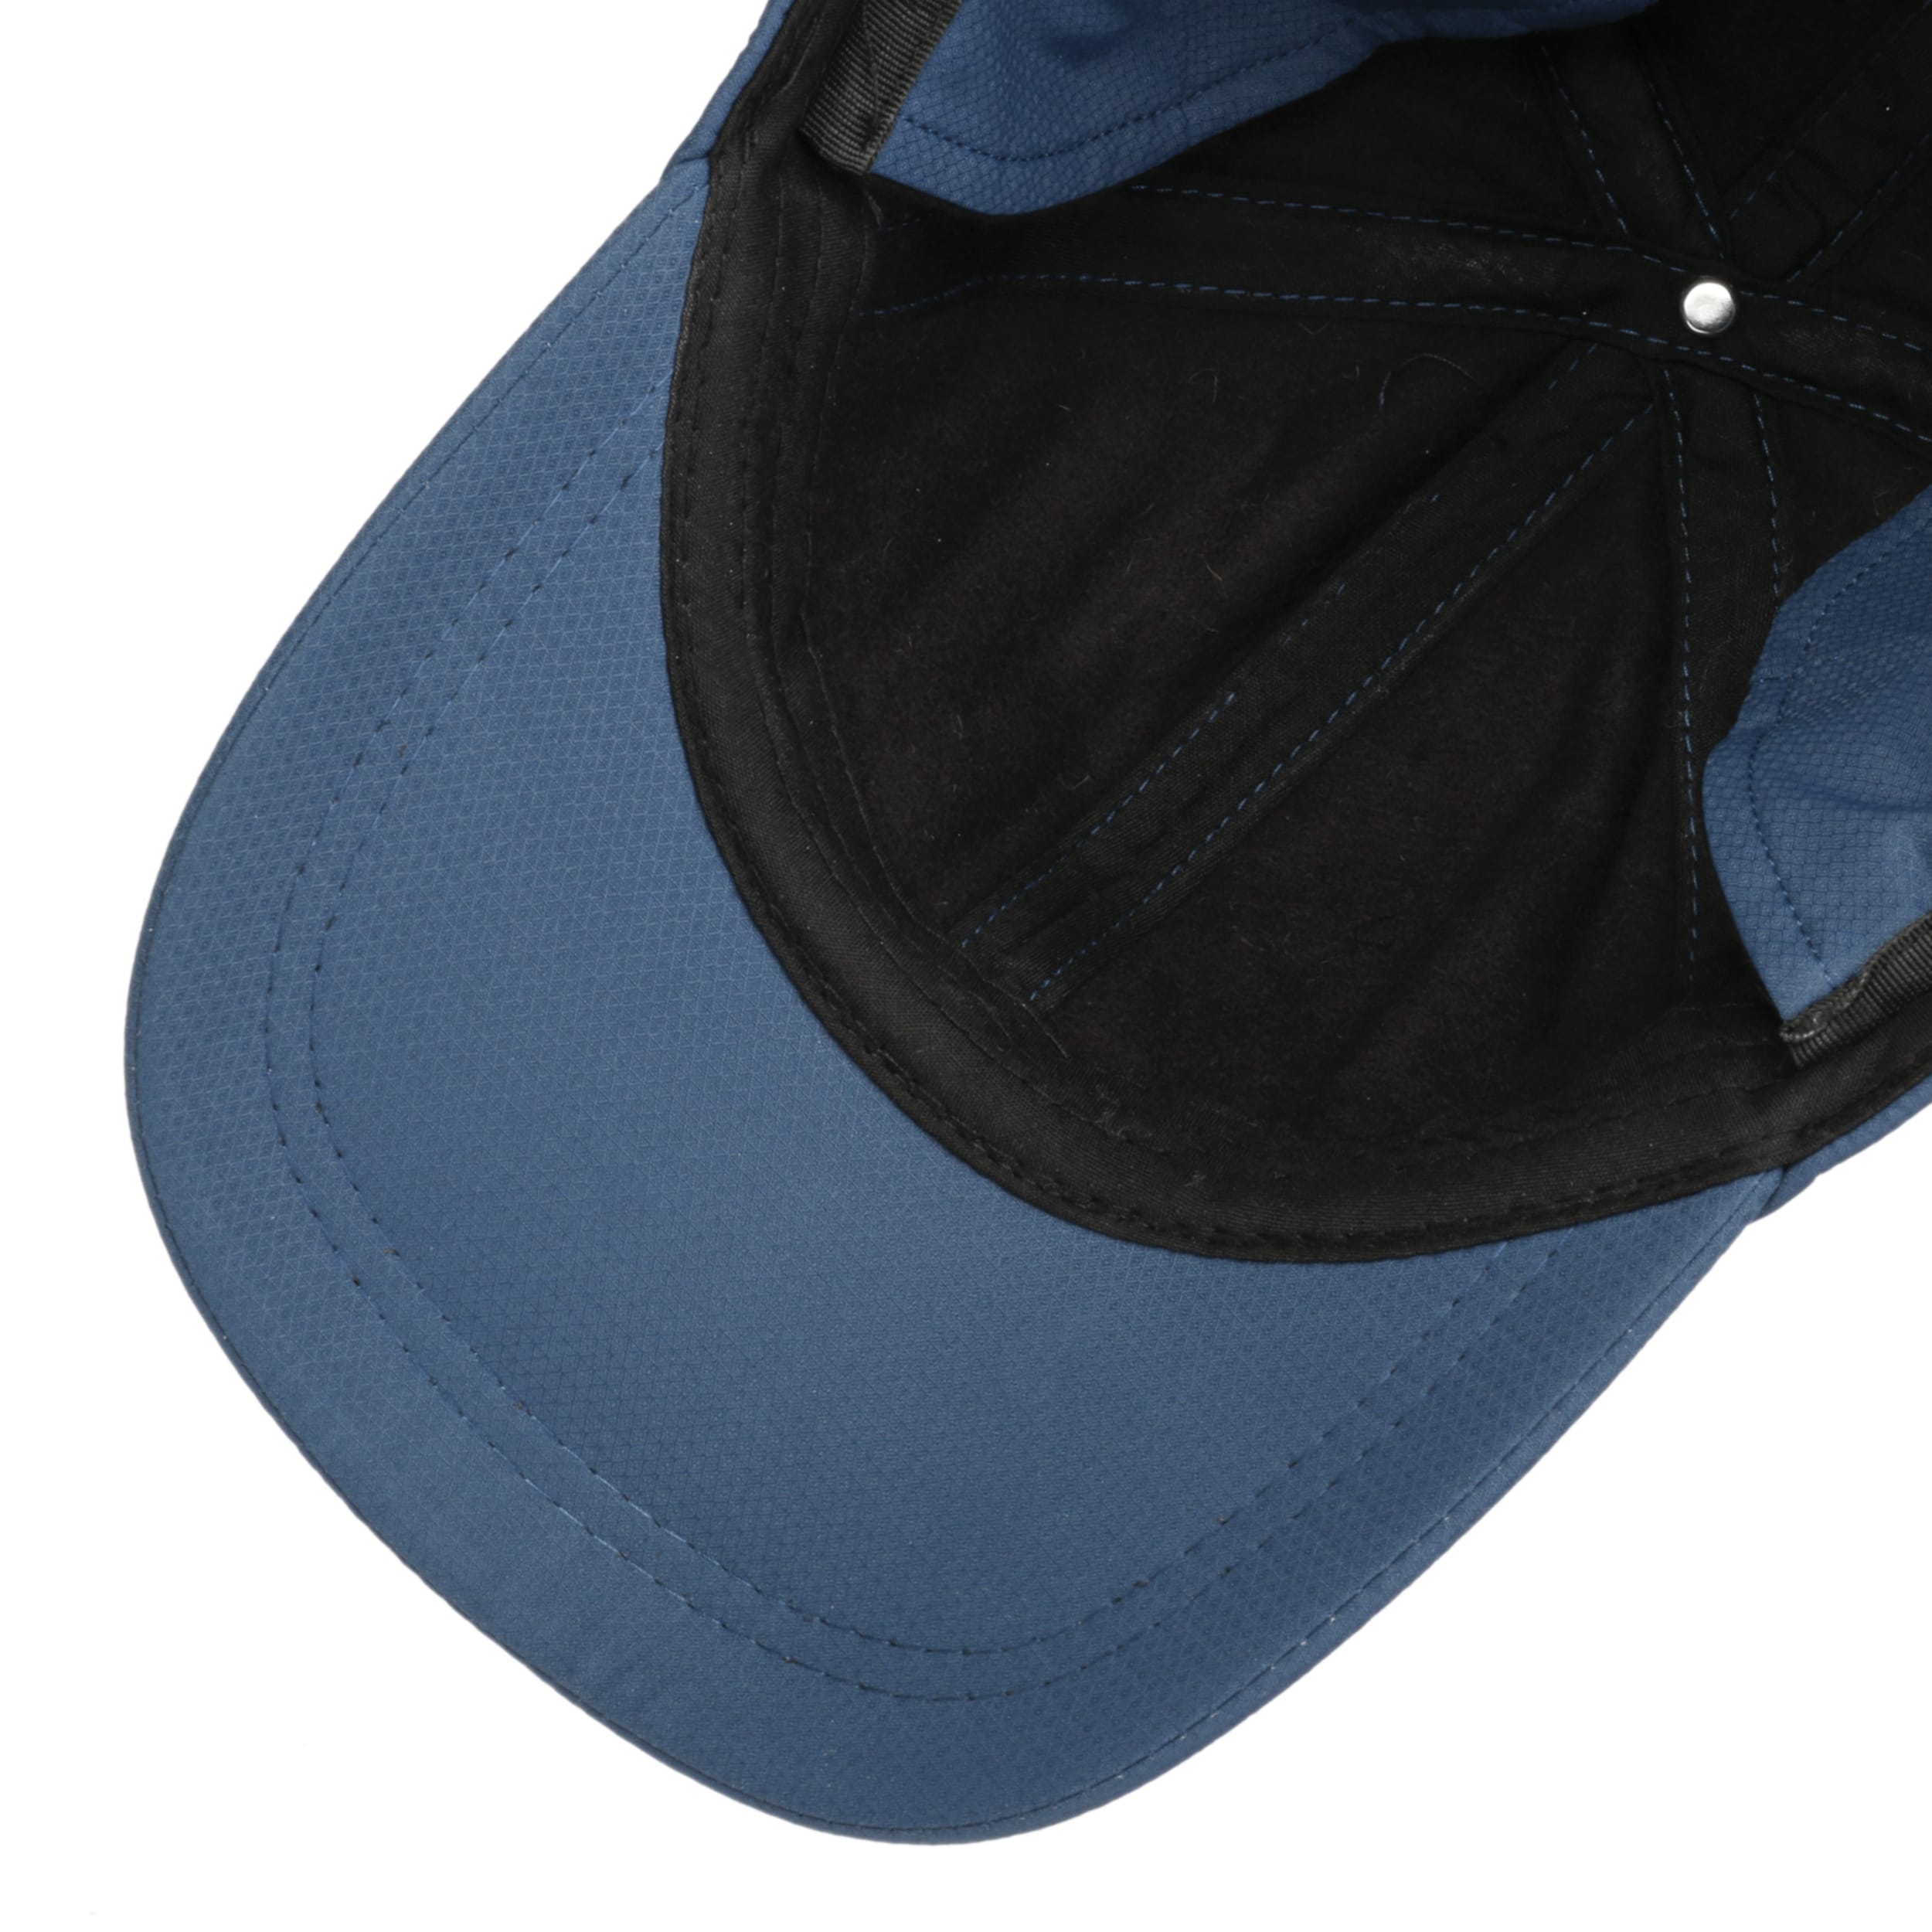 3M Thinsulate Cap by - Ohrenklappen Lipodo € 29,95 mit